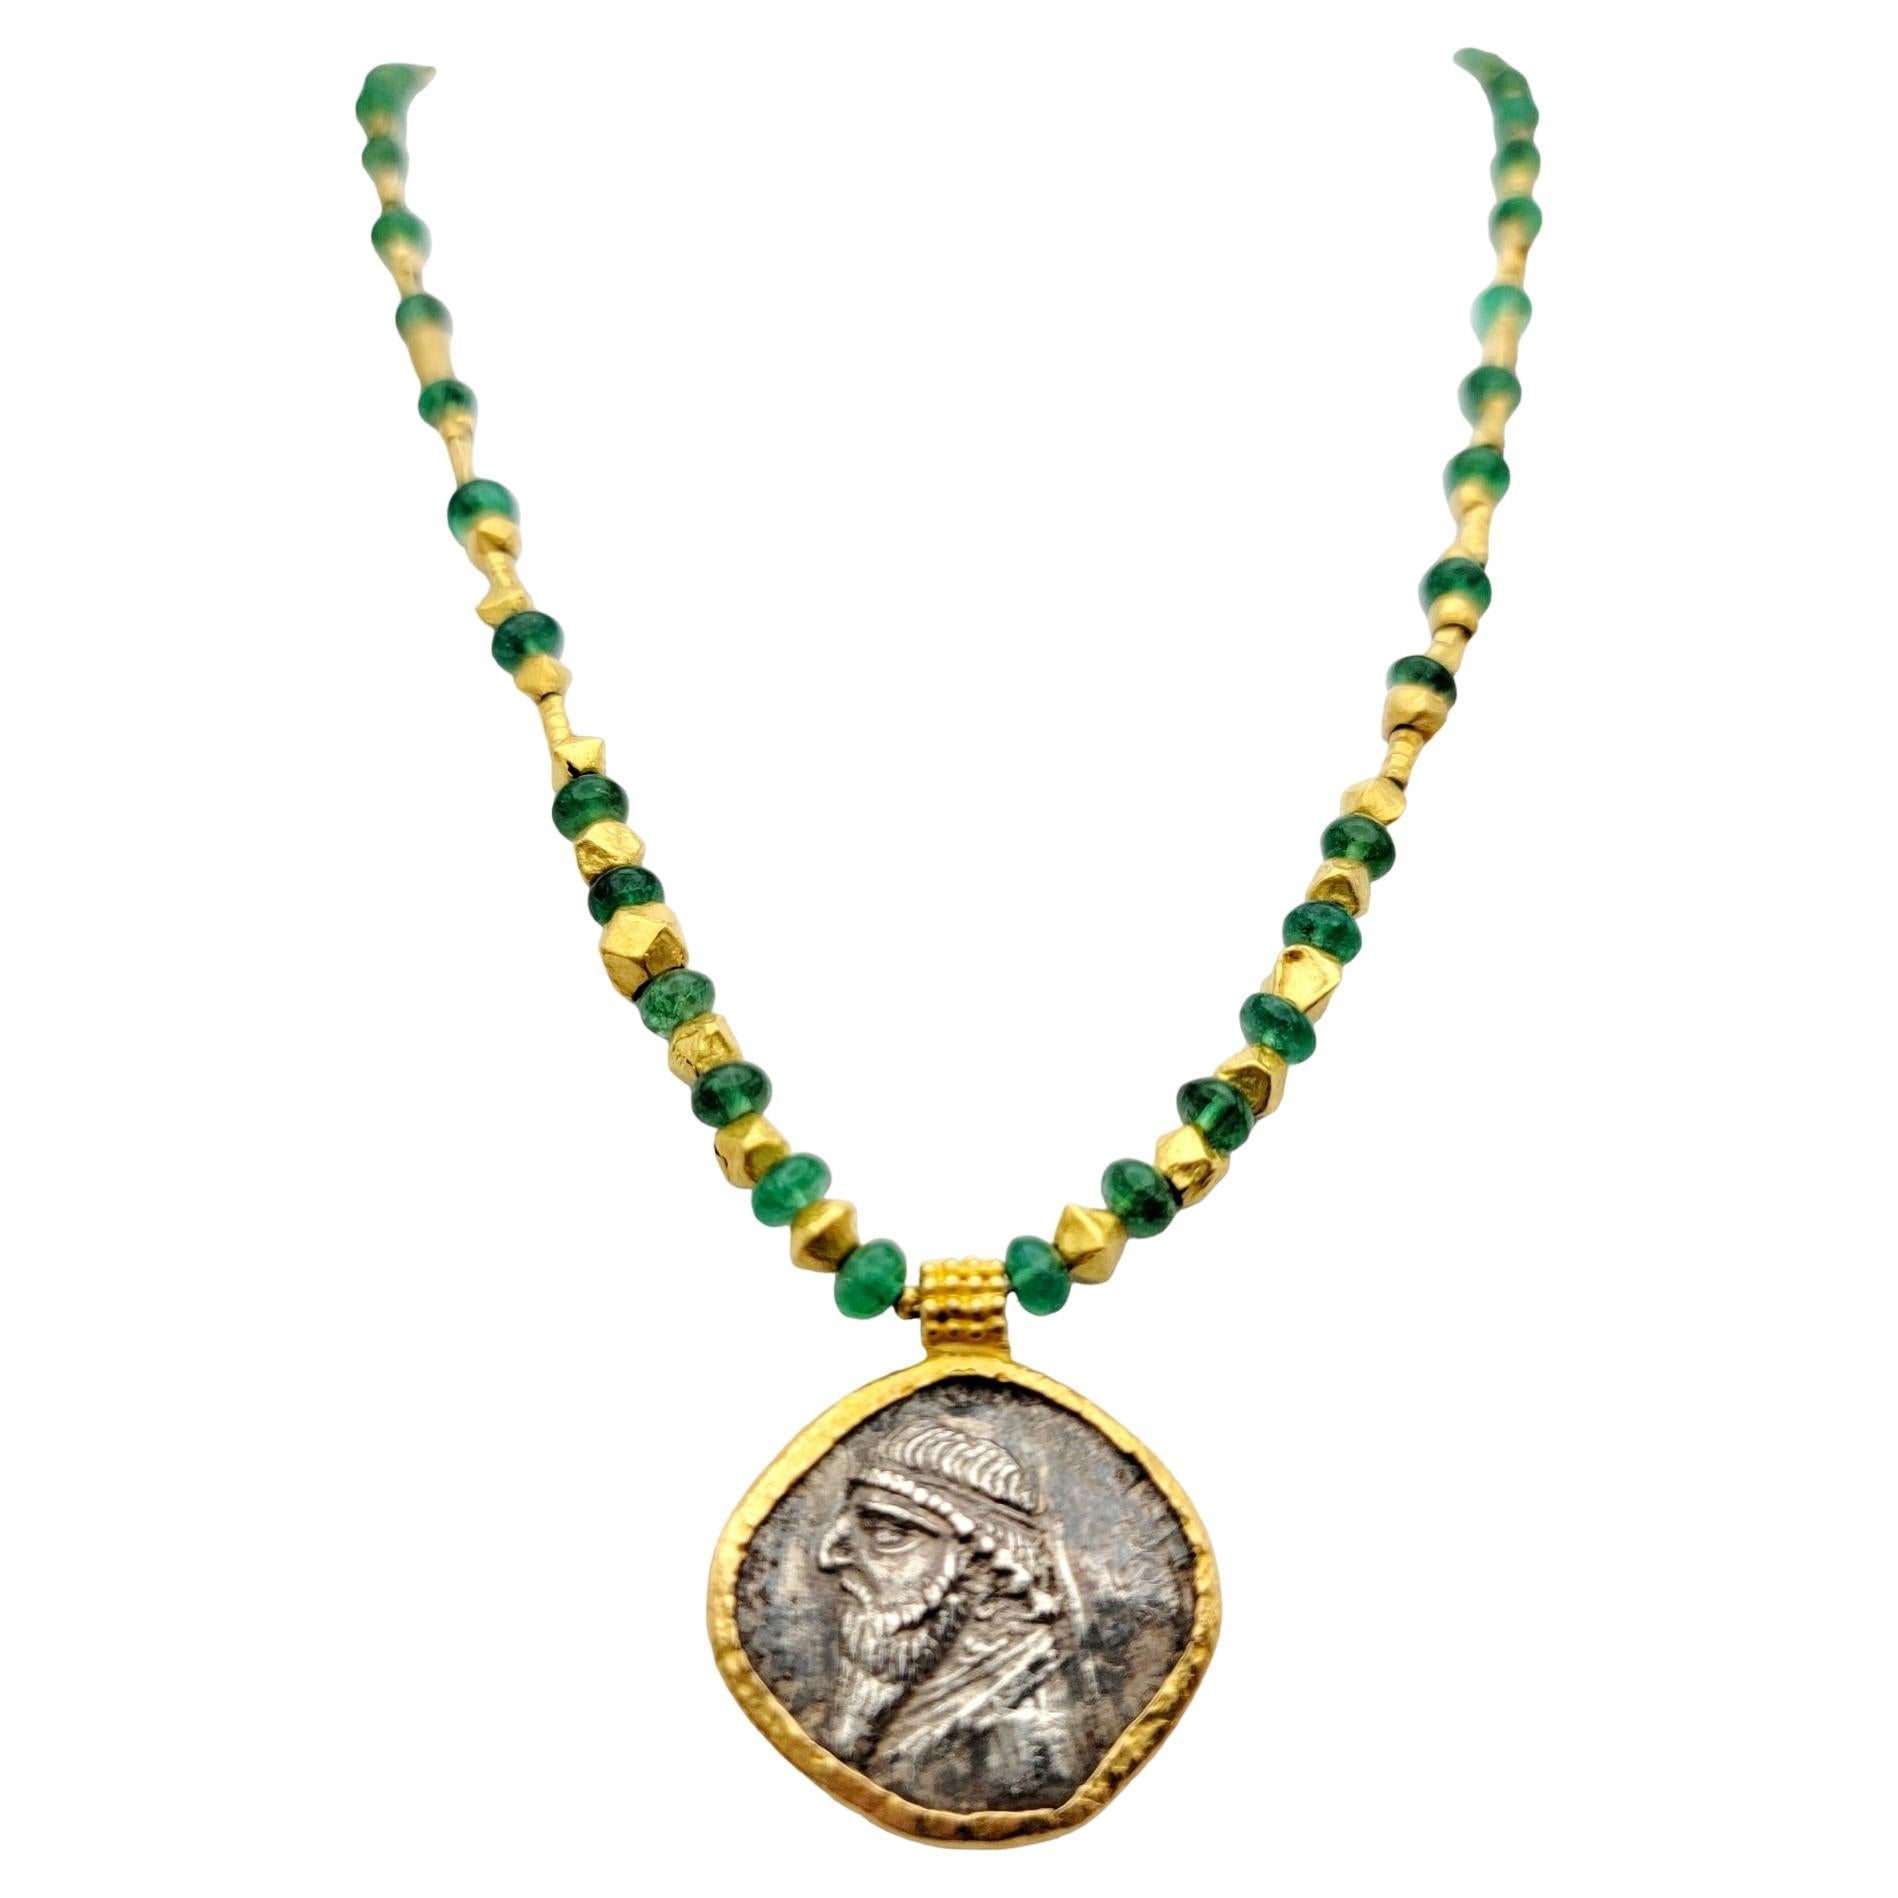 Tetradrachm of Mithridates II Silver Coin Pendant and Emerald Necklace 22 Karat For Sale